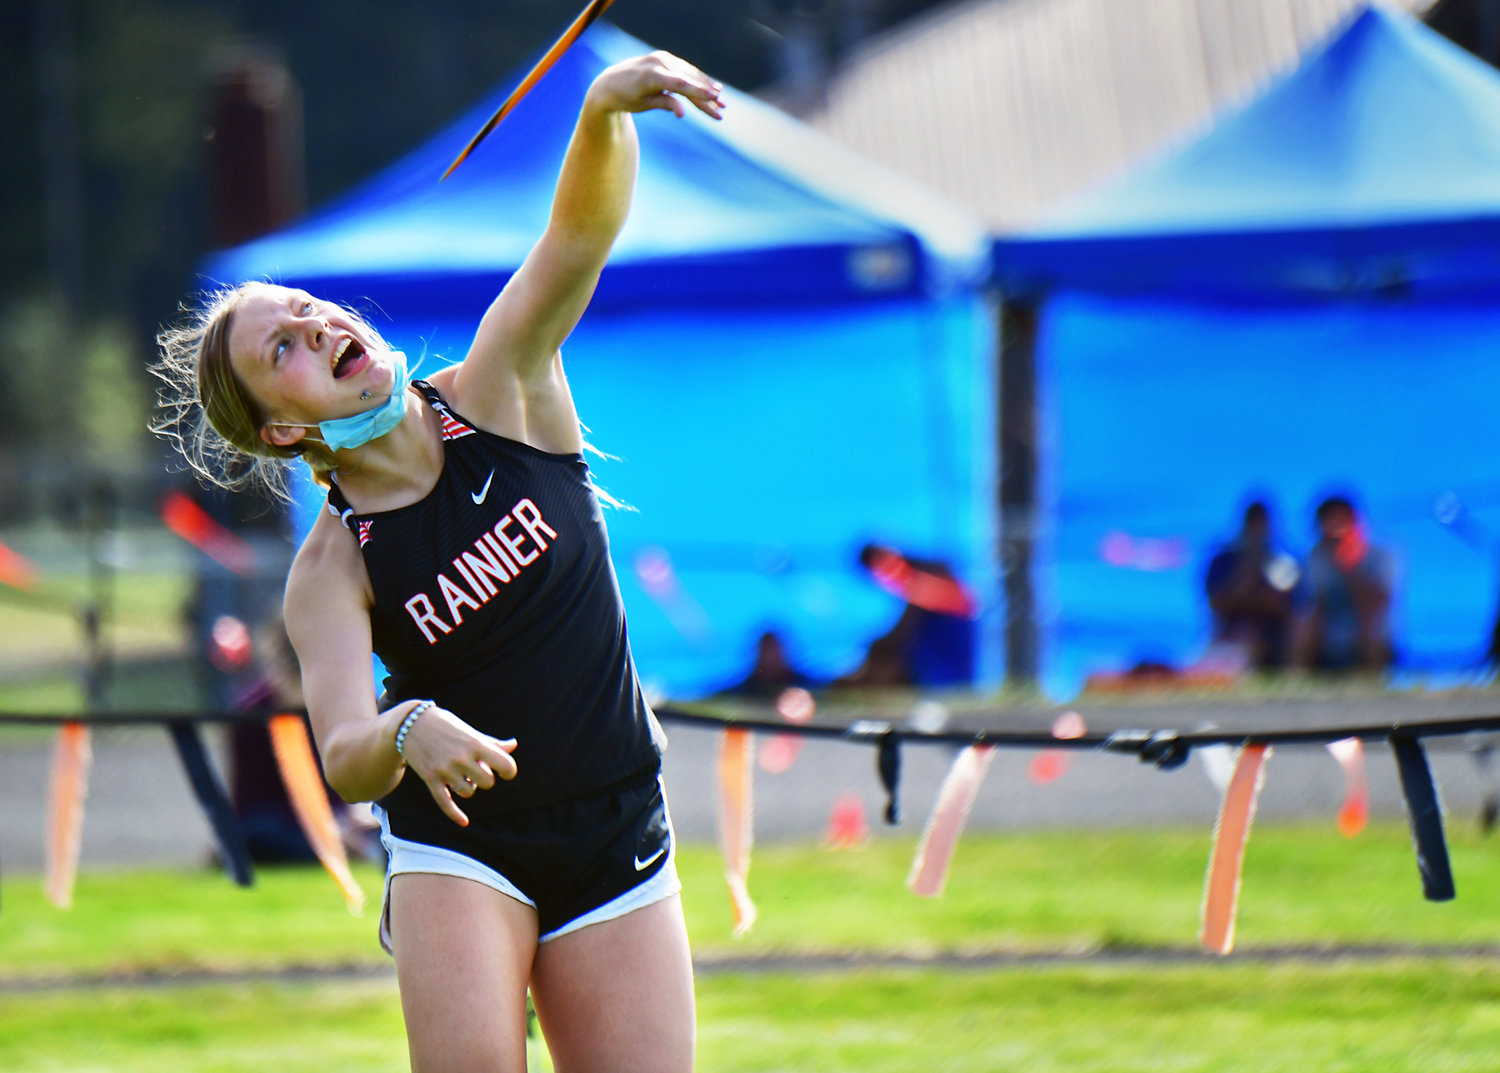 Rainier High School’s Kaeley Schultz unleashes the javelin on Thursday, April 29, during the WIAA District 4 Track & Field Championships at Rainier High School.